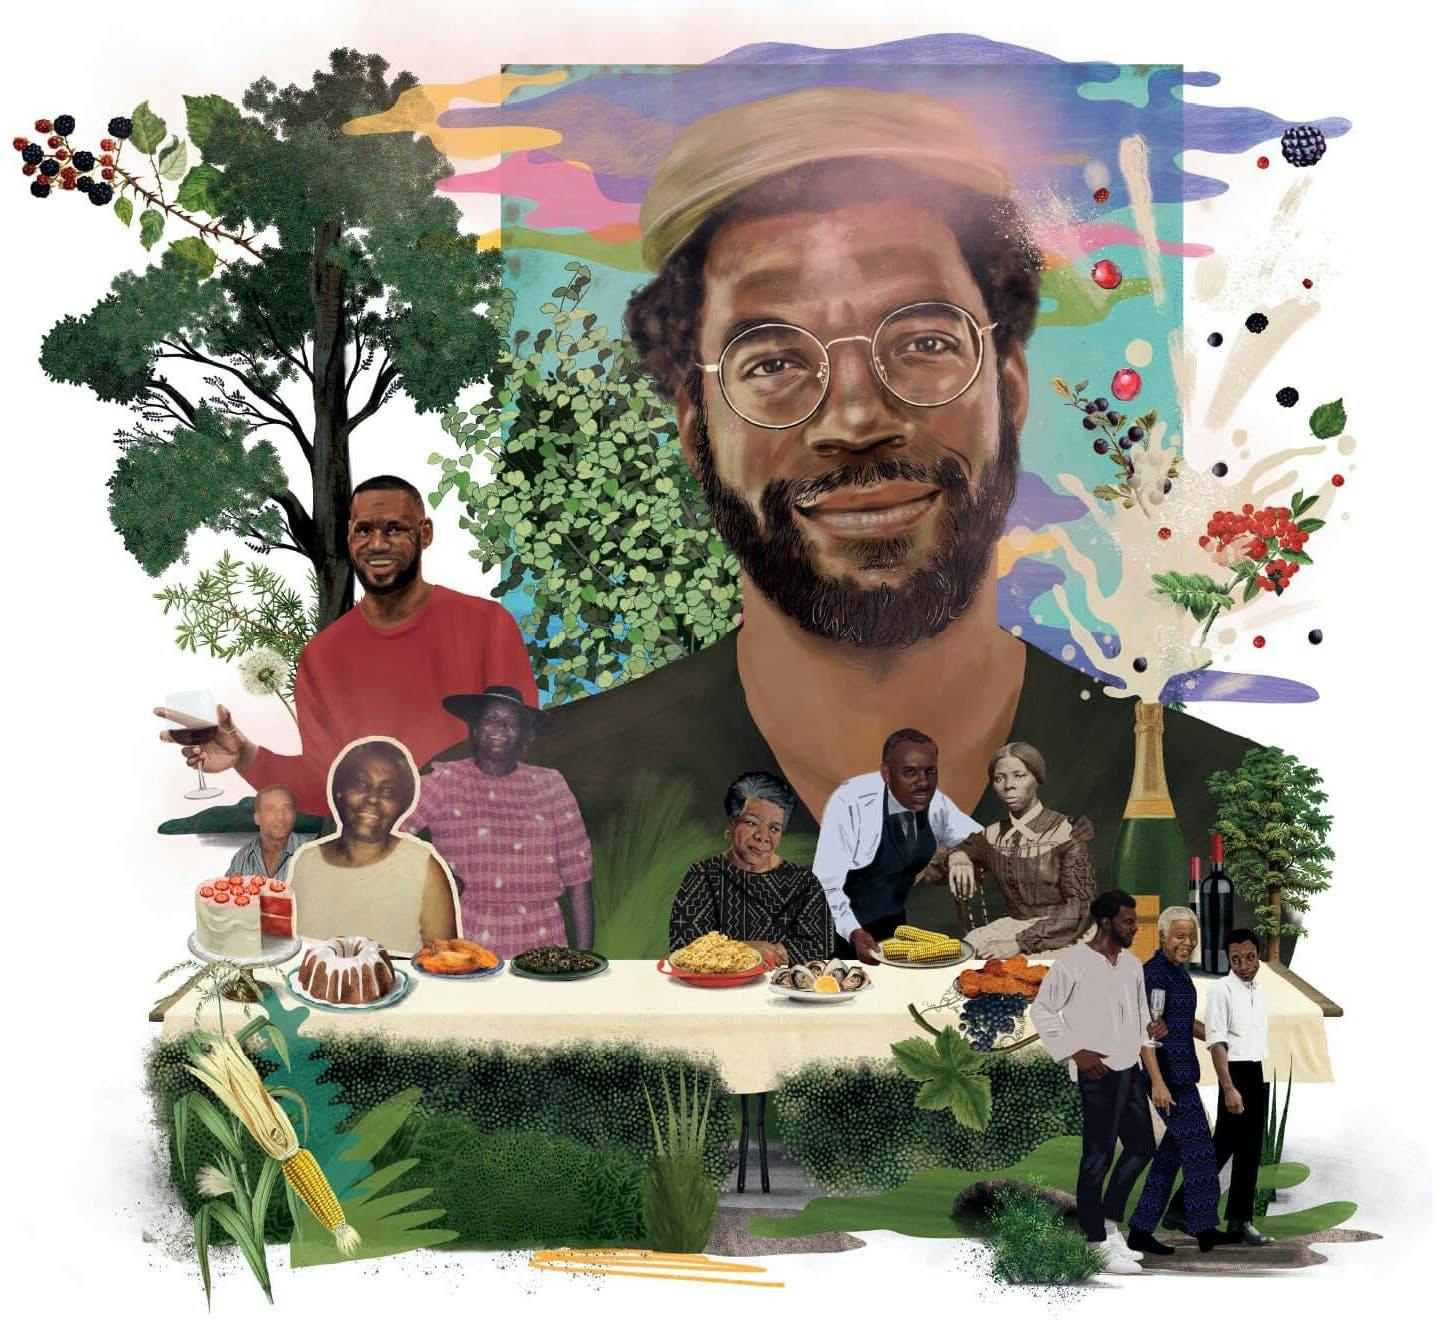 Illustration depicting Stephen Satterfield's dream last supper. A long table dressed in a cream table cloth is topped with various dishes, cakes, and bottles of wine and champagne. Around the table are depicted Stephen's parents and grandparents, alongside Maya Angelou, James Baldwin, Harriet Tubman, Nelson Mandela, and LeBron James. The setting is in a field in Atlanta, surrounded by trees and crops growing.